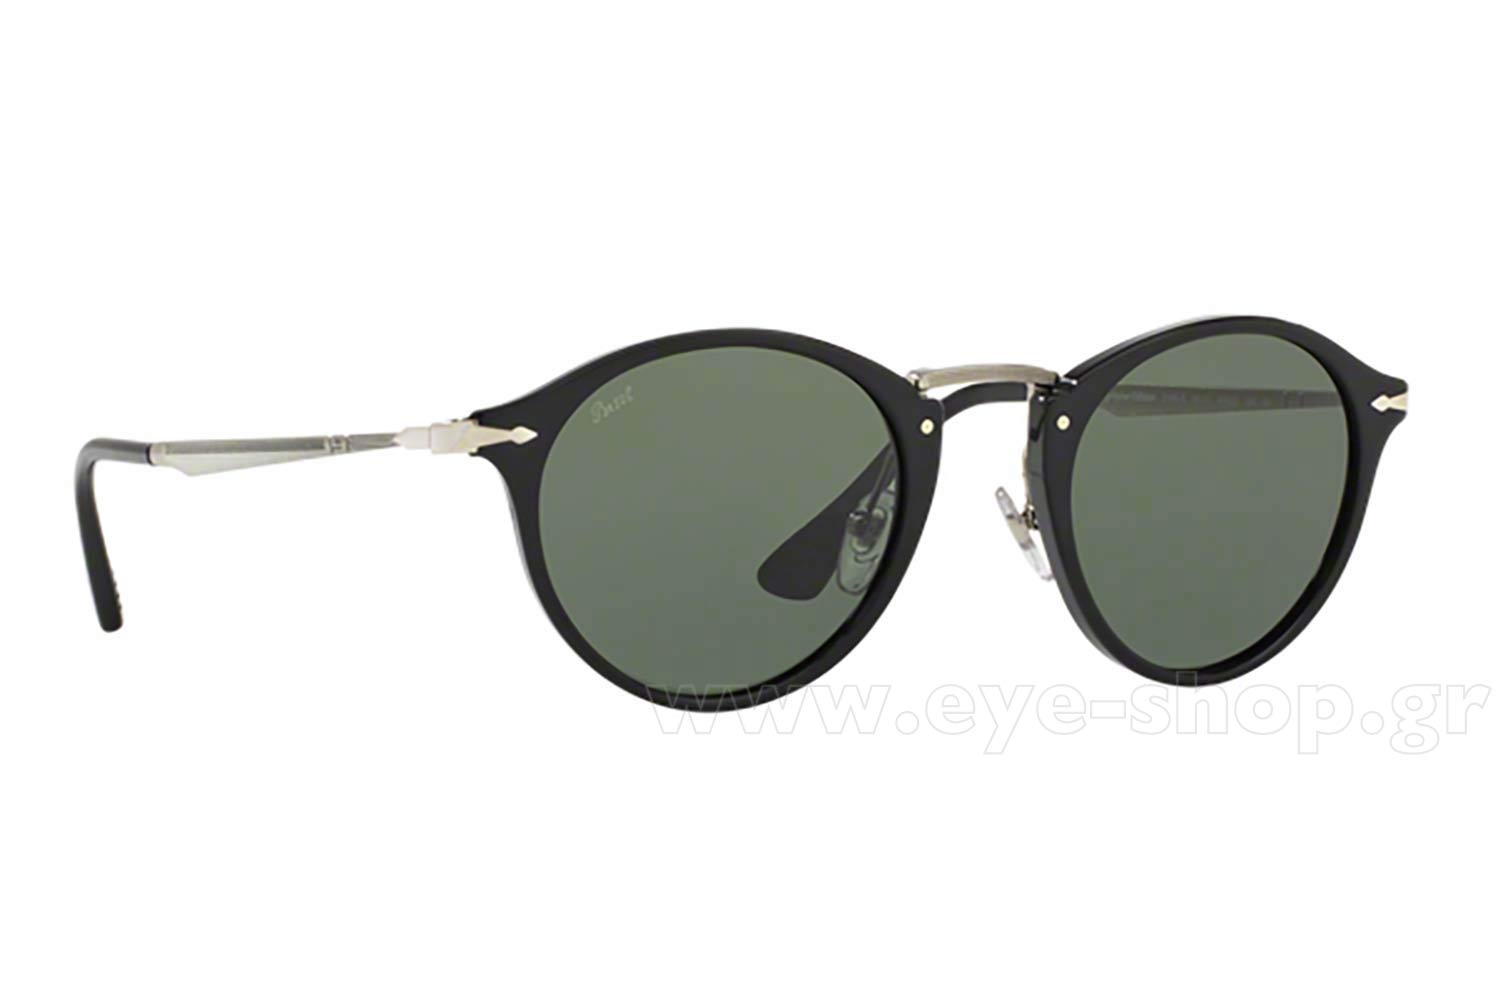 Persol 3166S